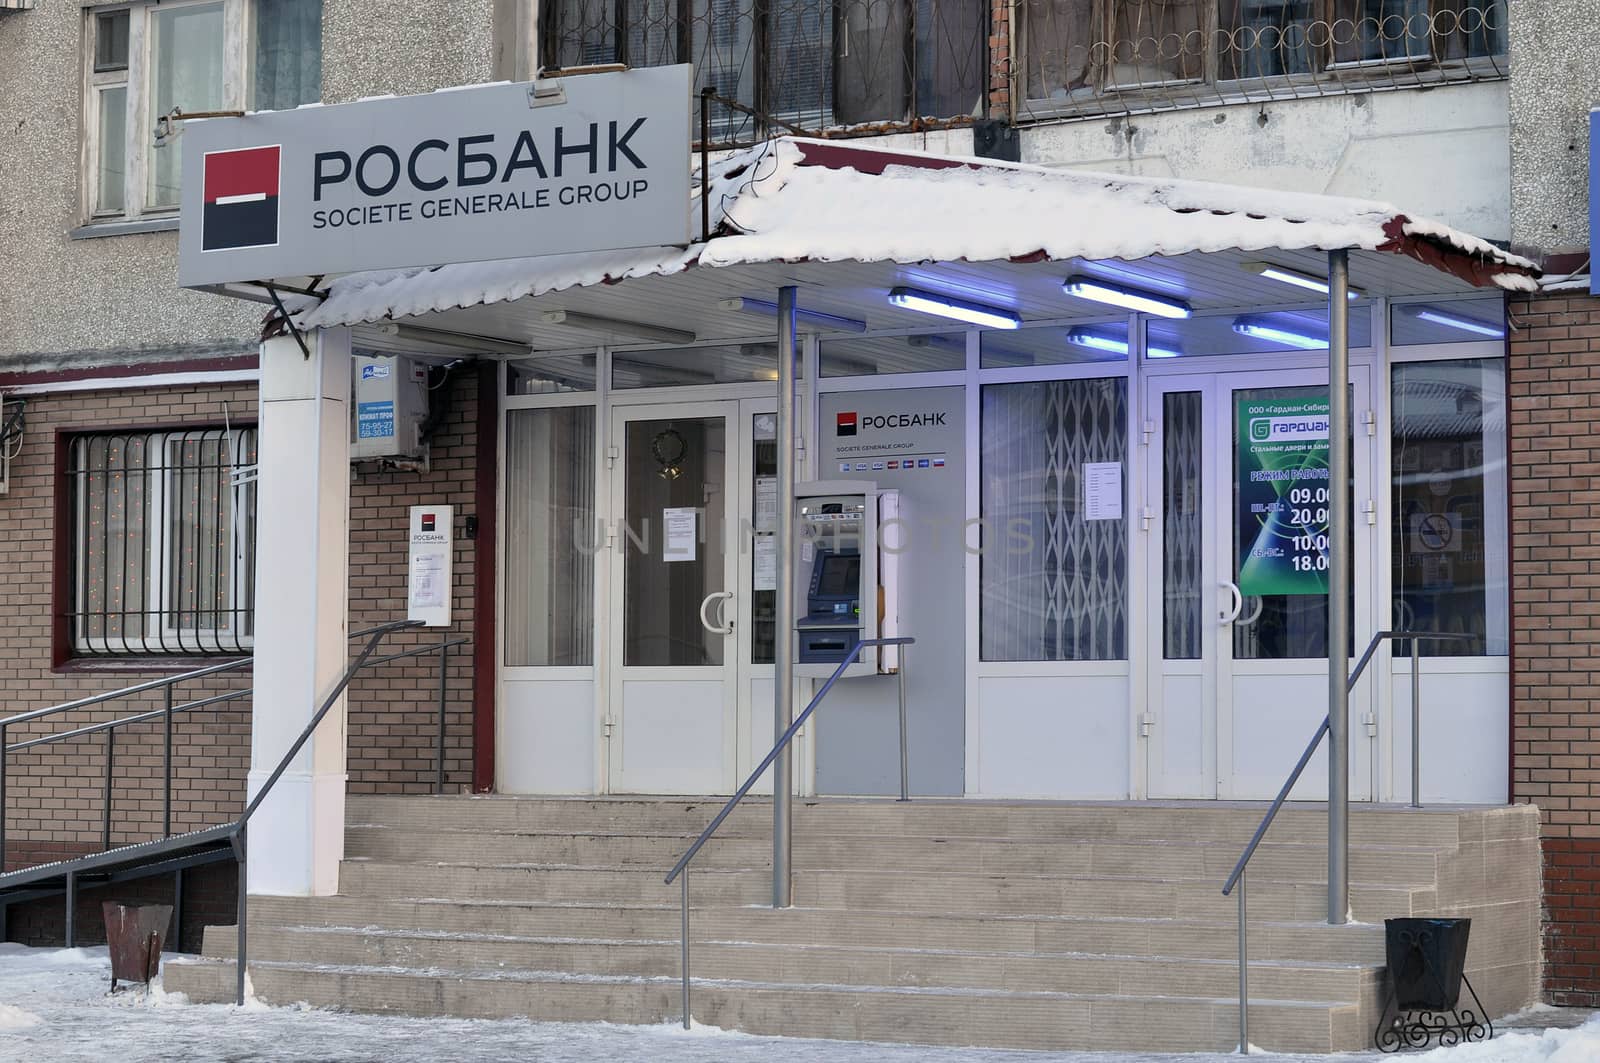 Porch and entrance to Rosbank on Melnikayte St., Tyumen, Russia